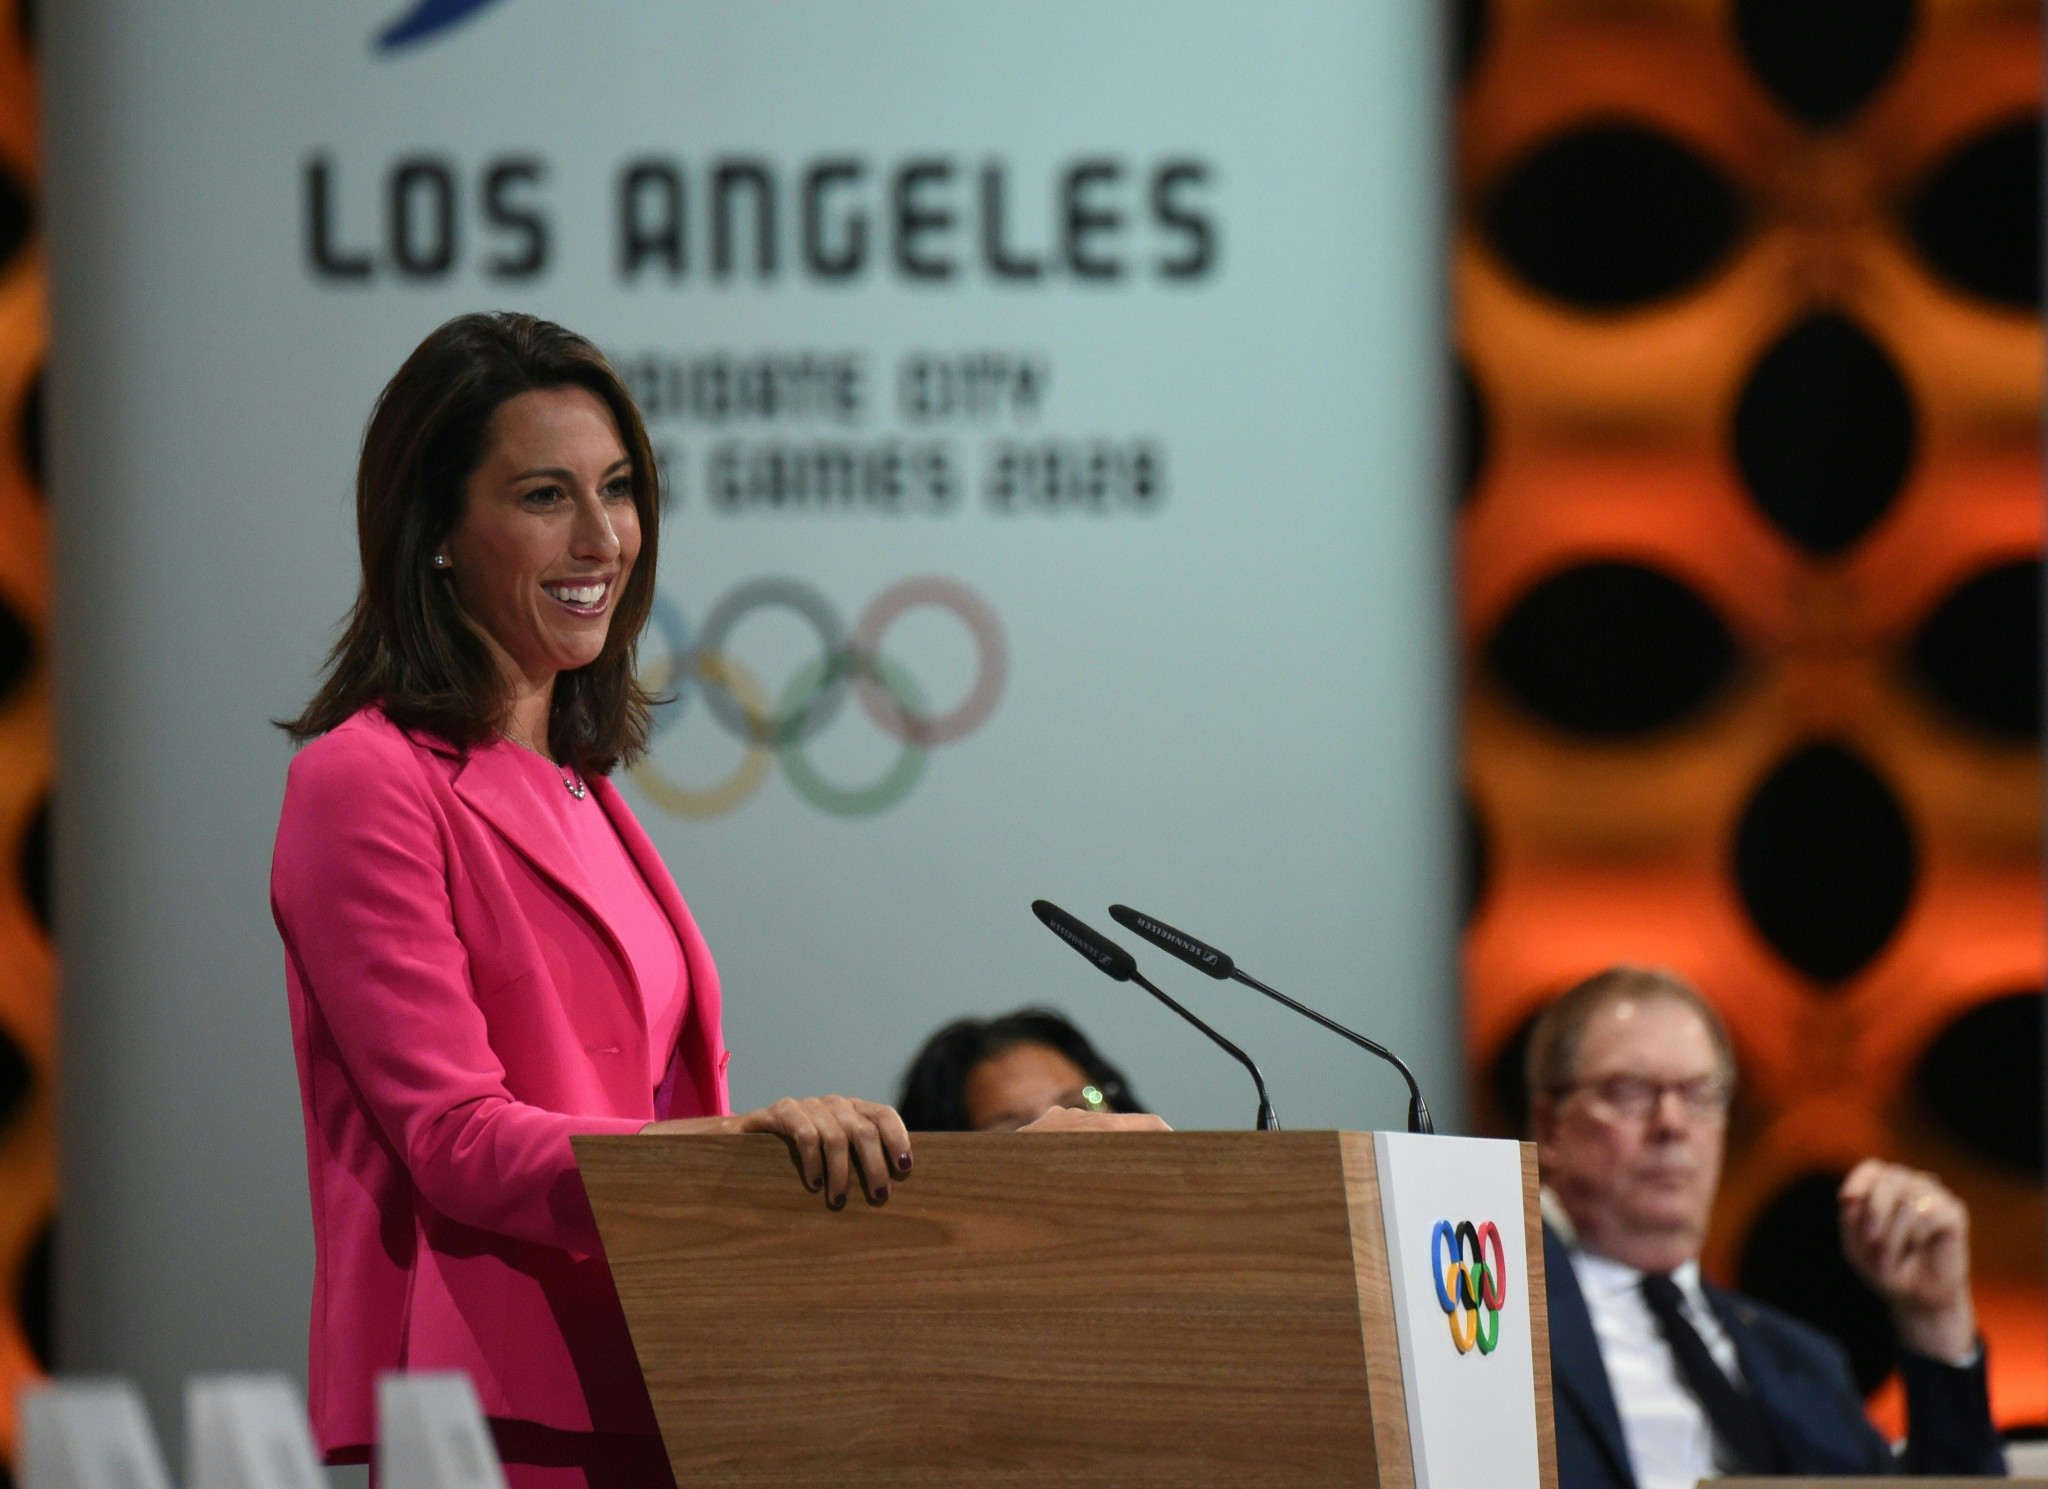 Janet Evans was seen as a crucial figure in Los Angeles being awarded the 2028 Olympics and Paralympics ©Getty Images